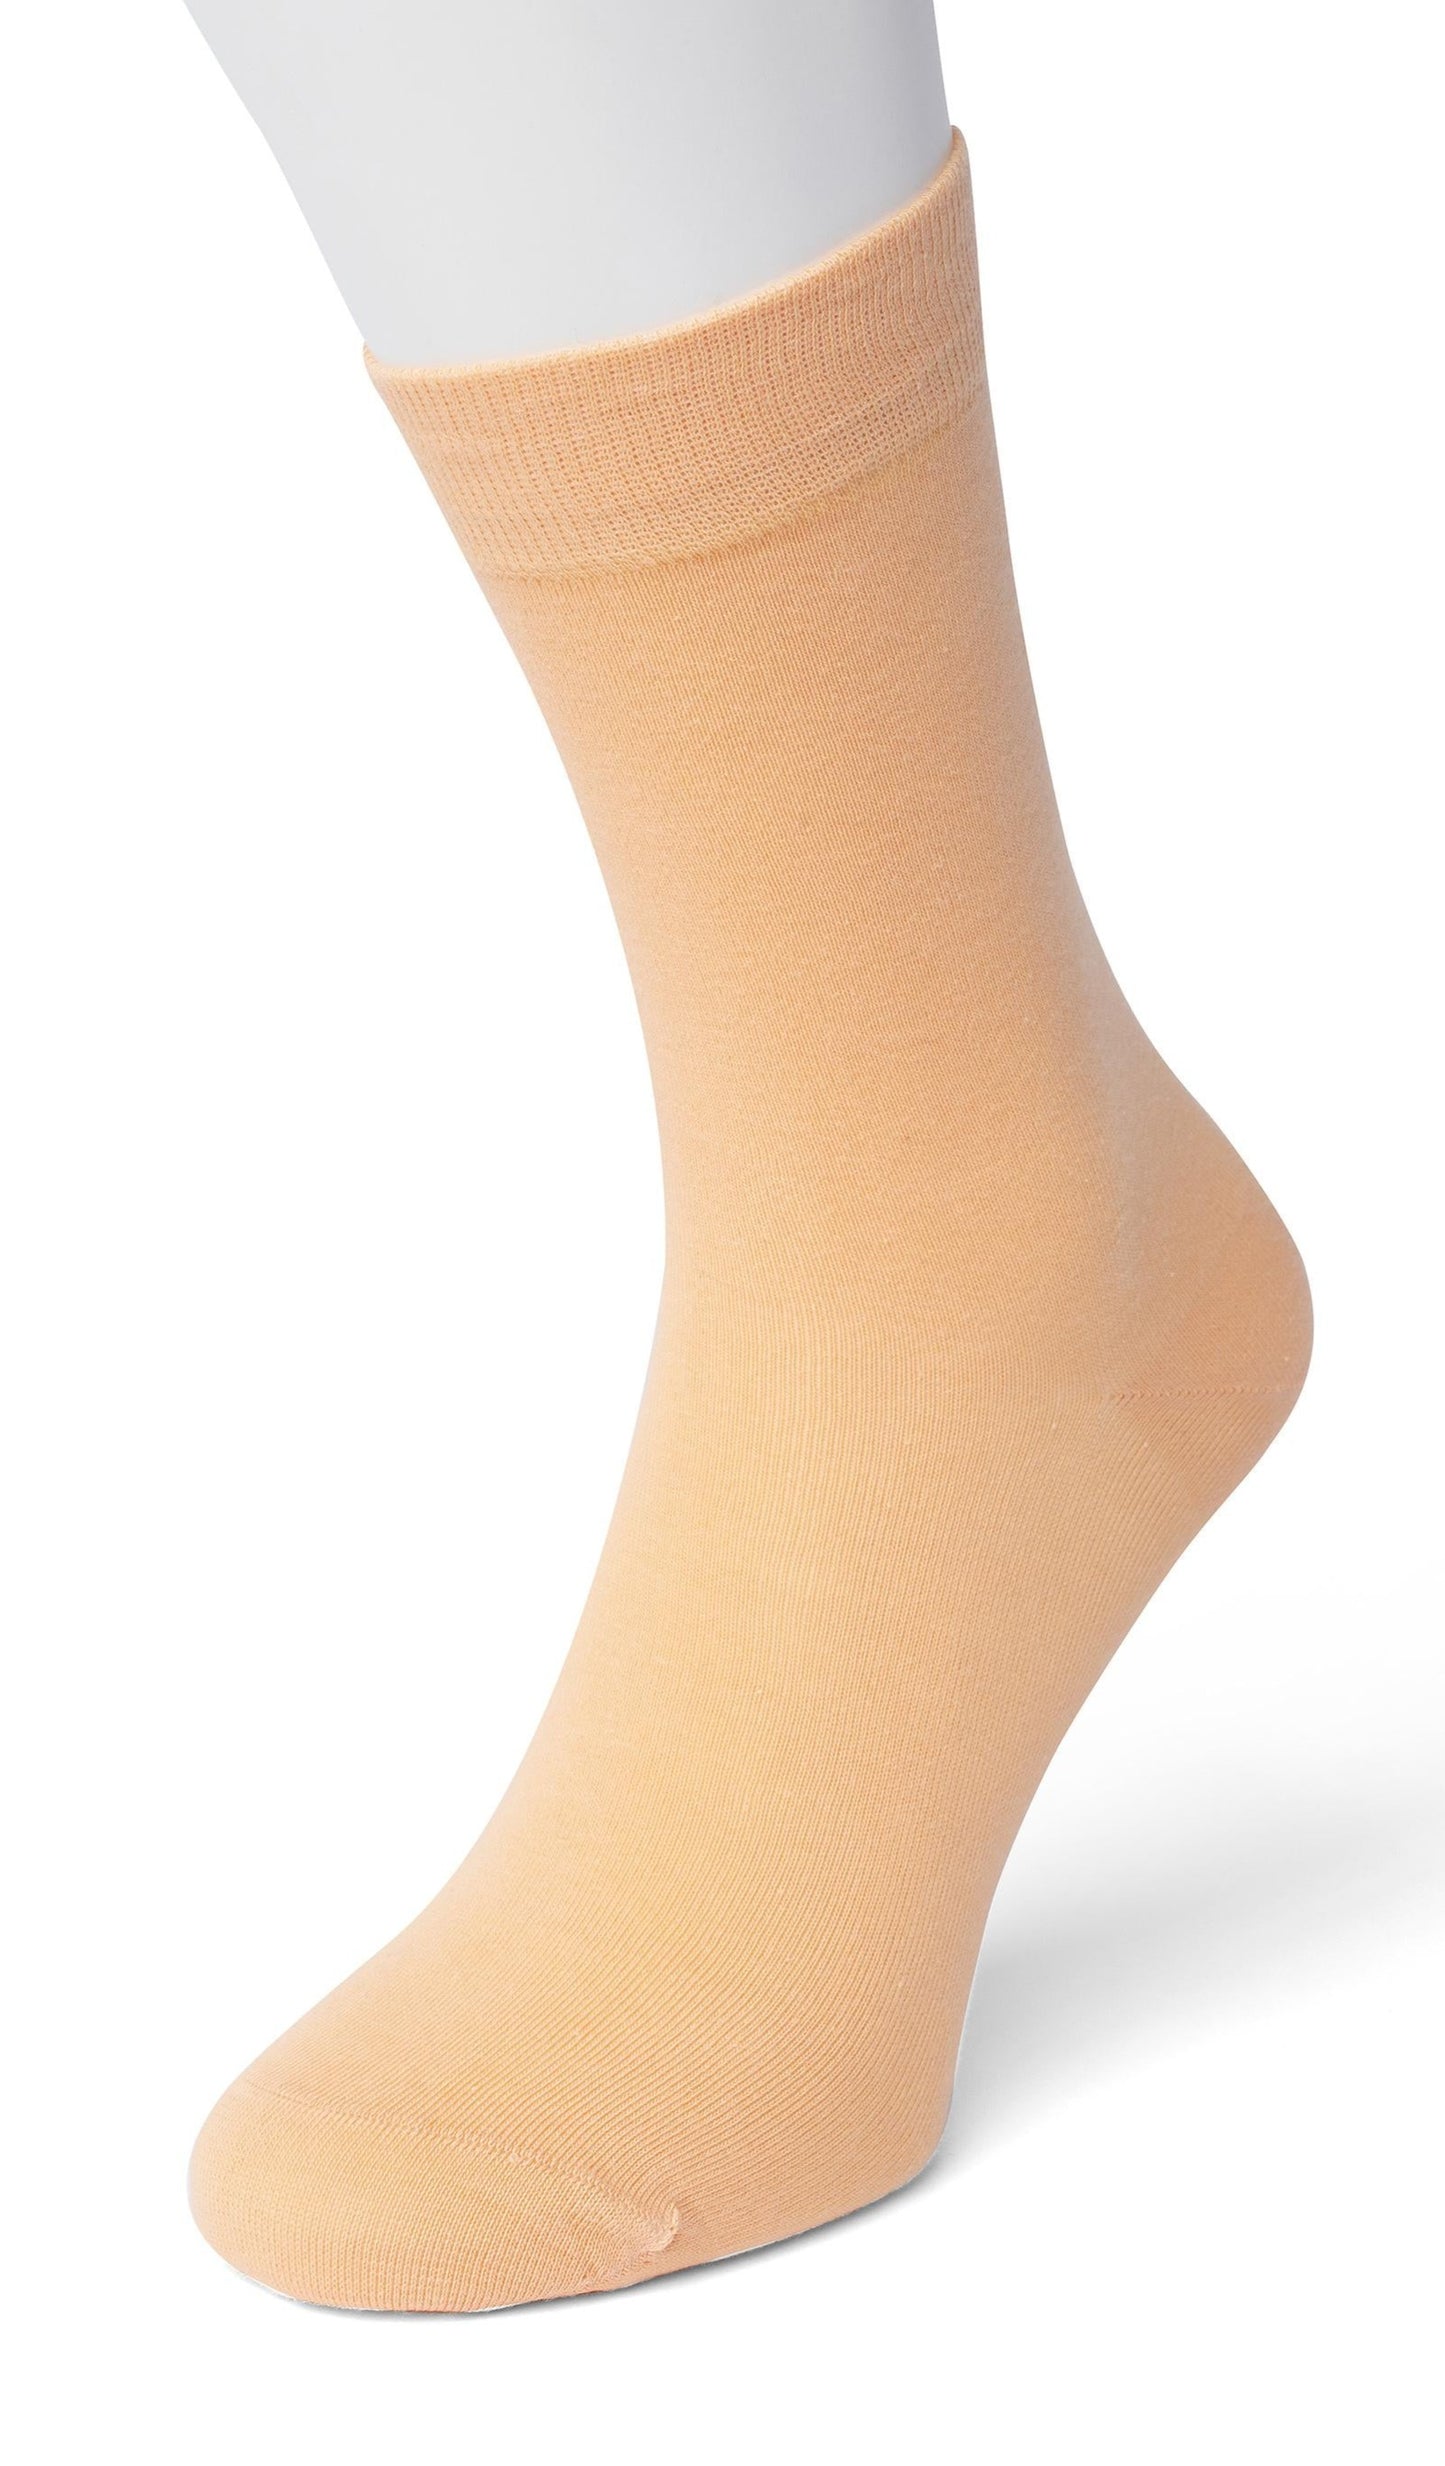 Bonnie Doon 83422 Cotton Sock -  Pastel peach ankle socks available in men and women sizes